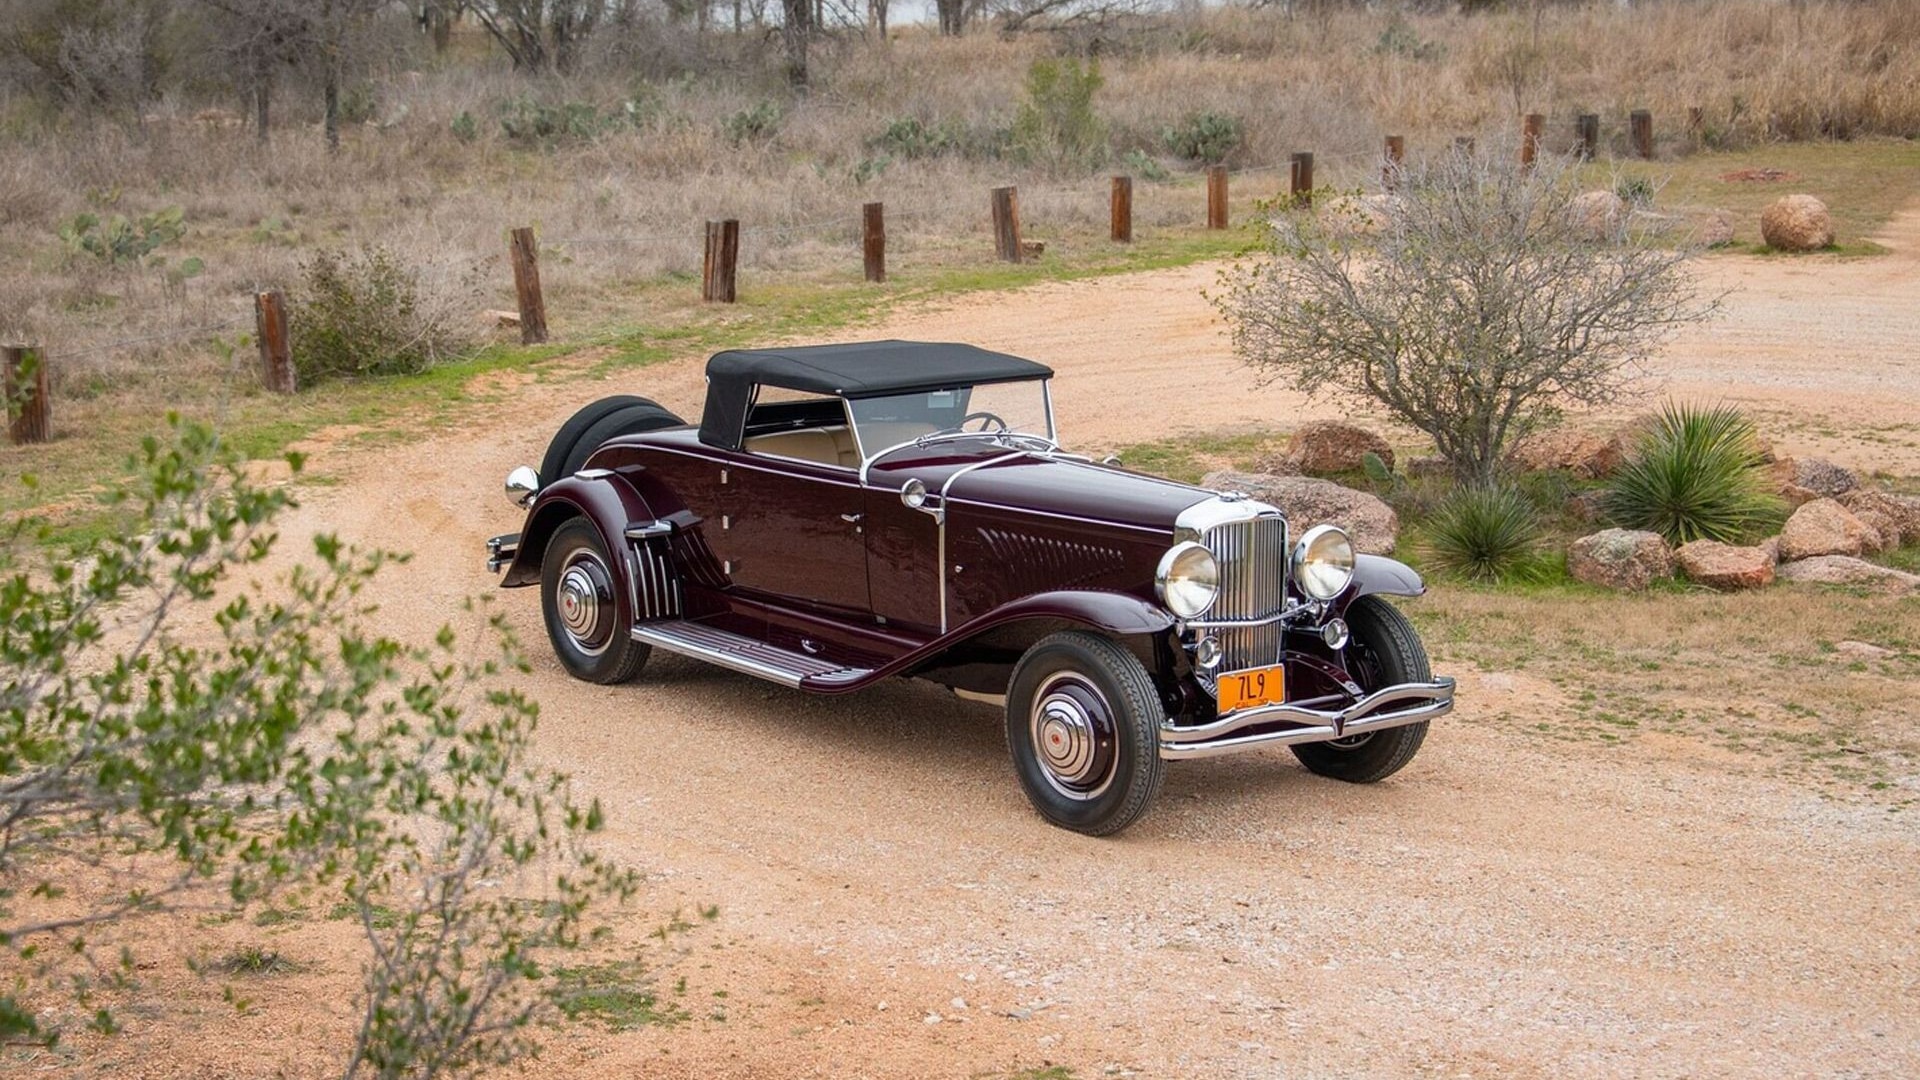 1930 Duesenberg Model J with coachwork by Murphy - Photo credit: RM Sotheby's